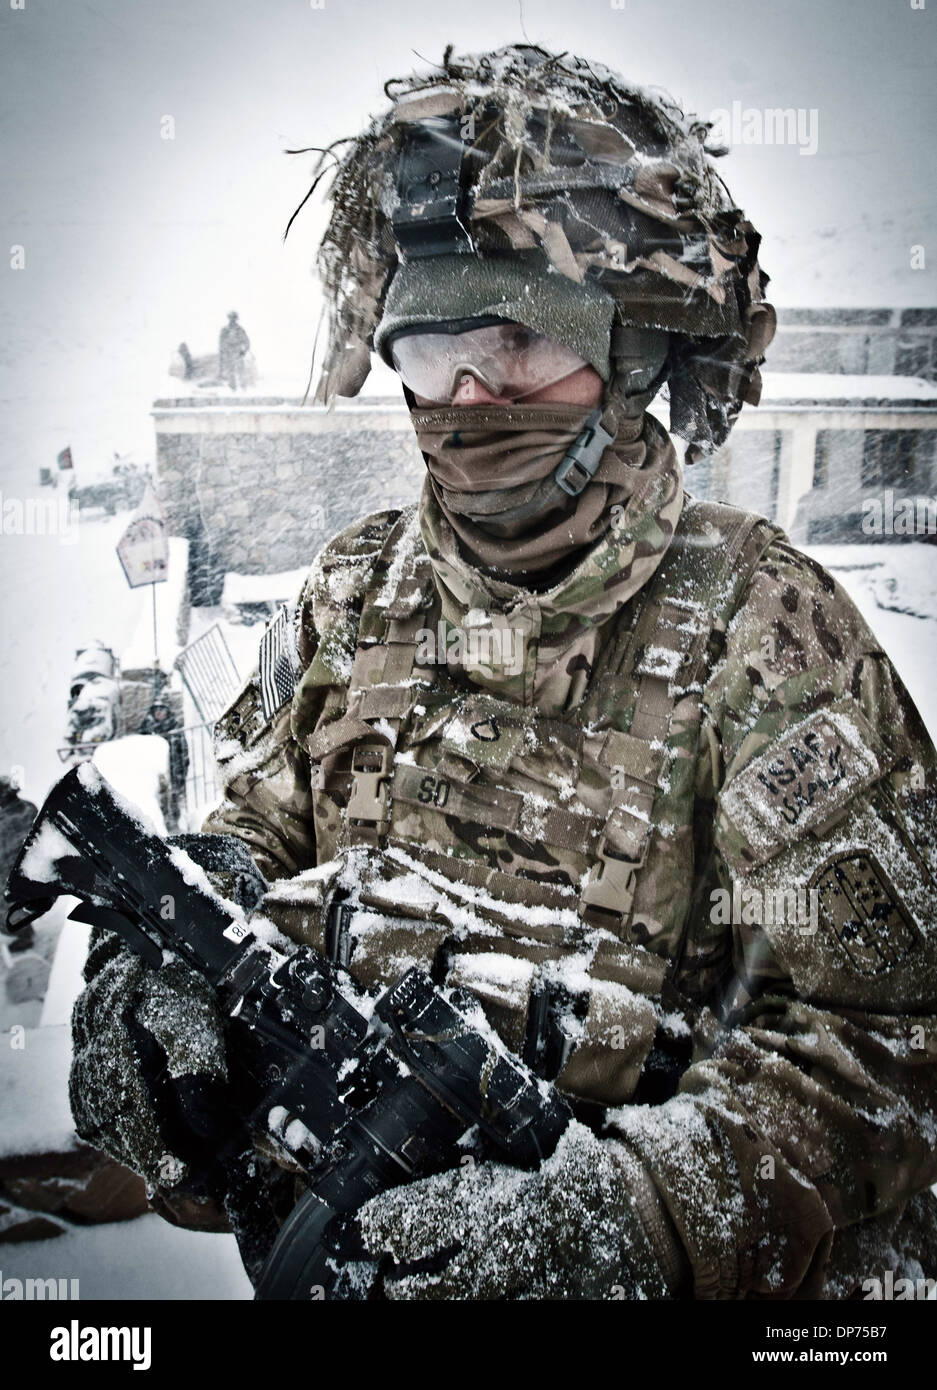 US Army Pfc. Dewey So covered in snow during a storm while on patrol January 15, 2012 in the village of Marzak, Paktika province, Afghanistan. Stock Photo